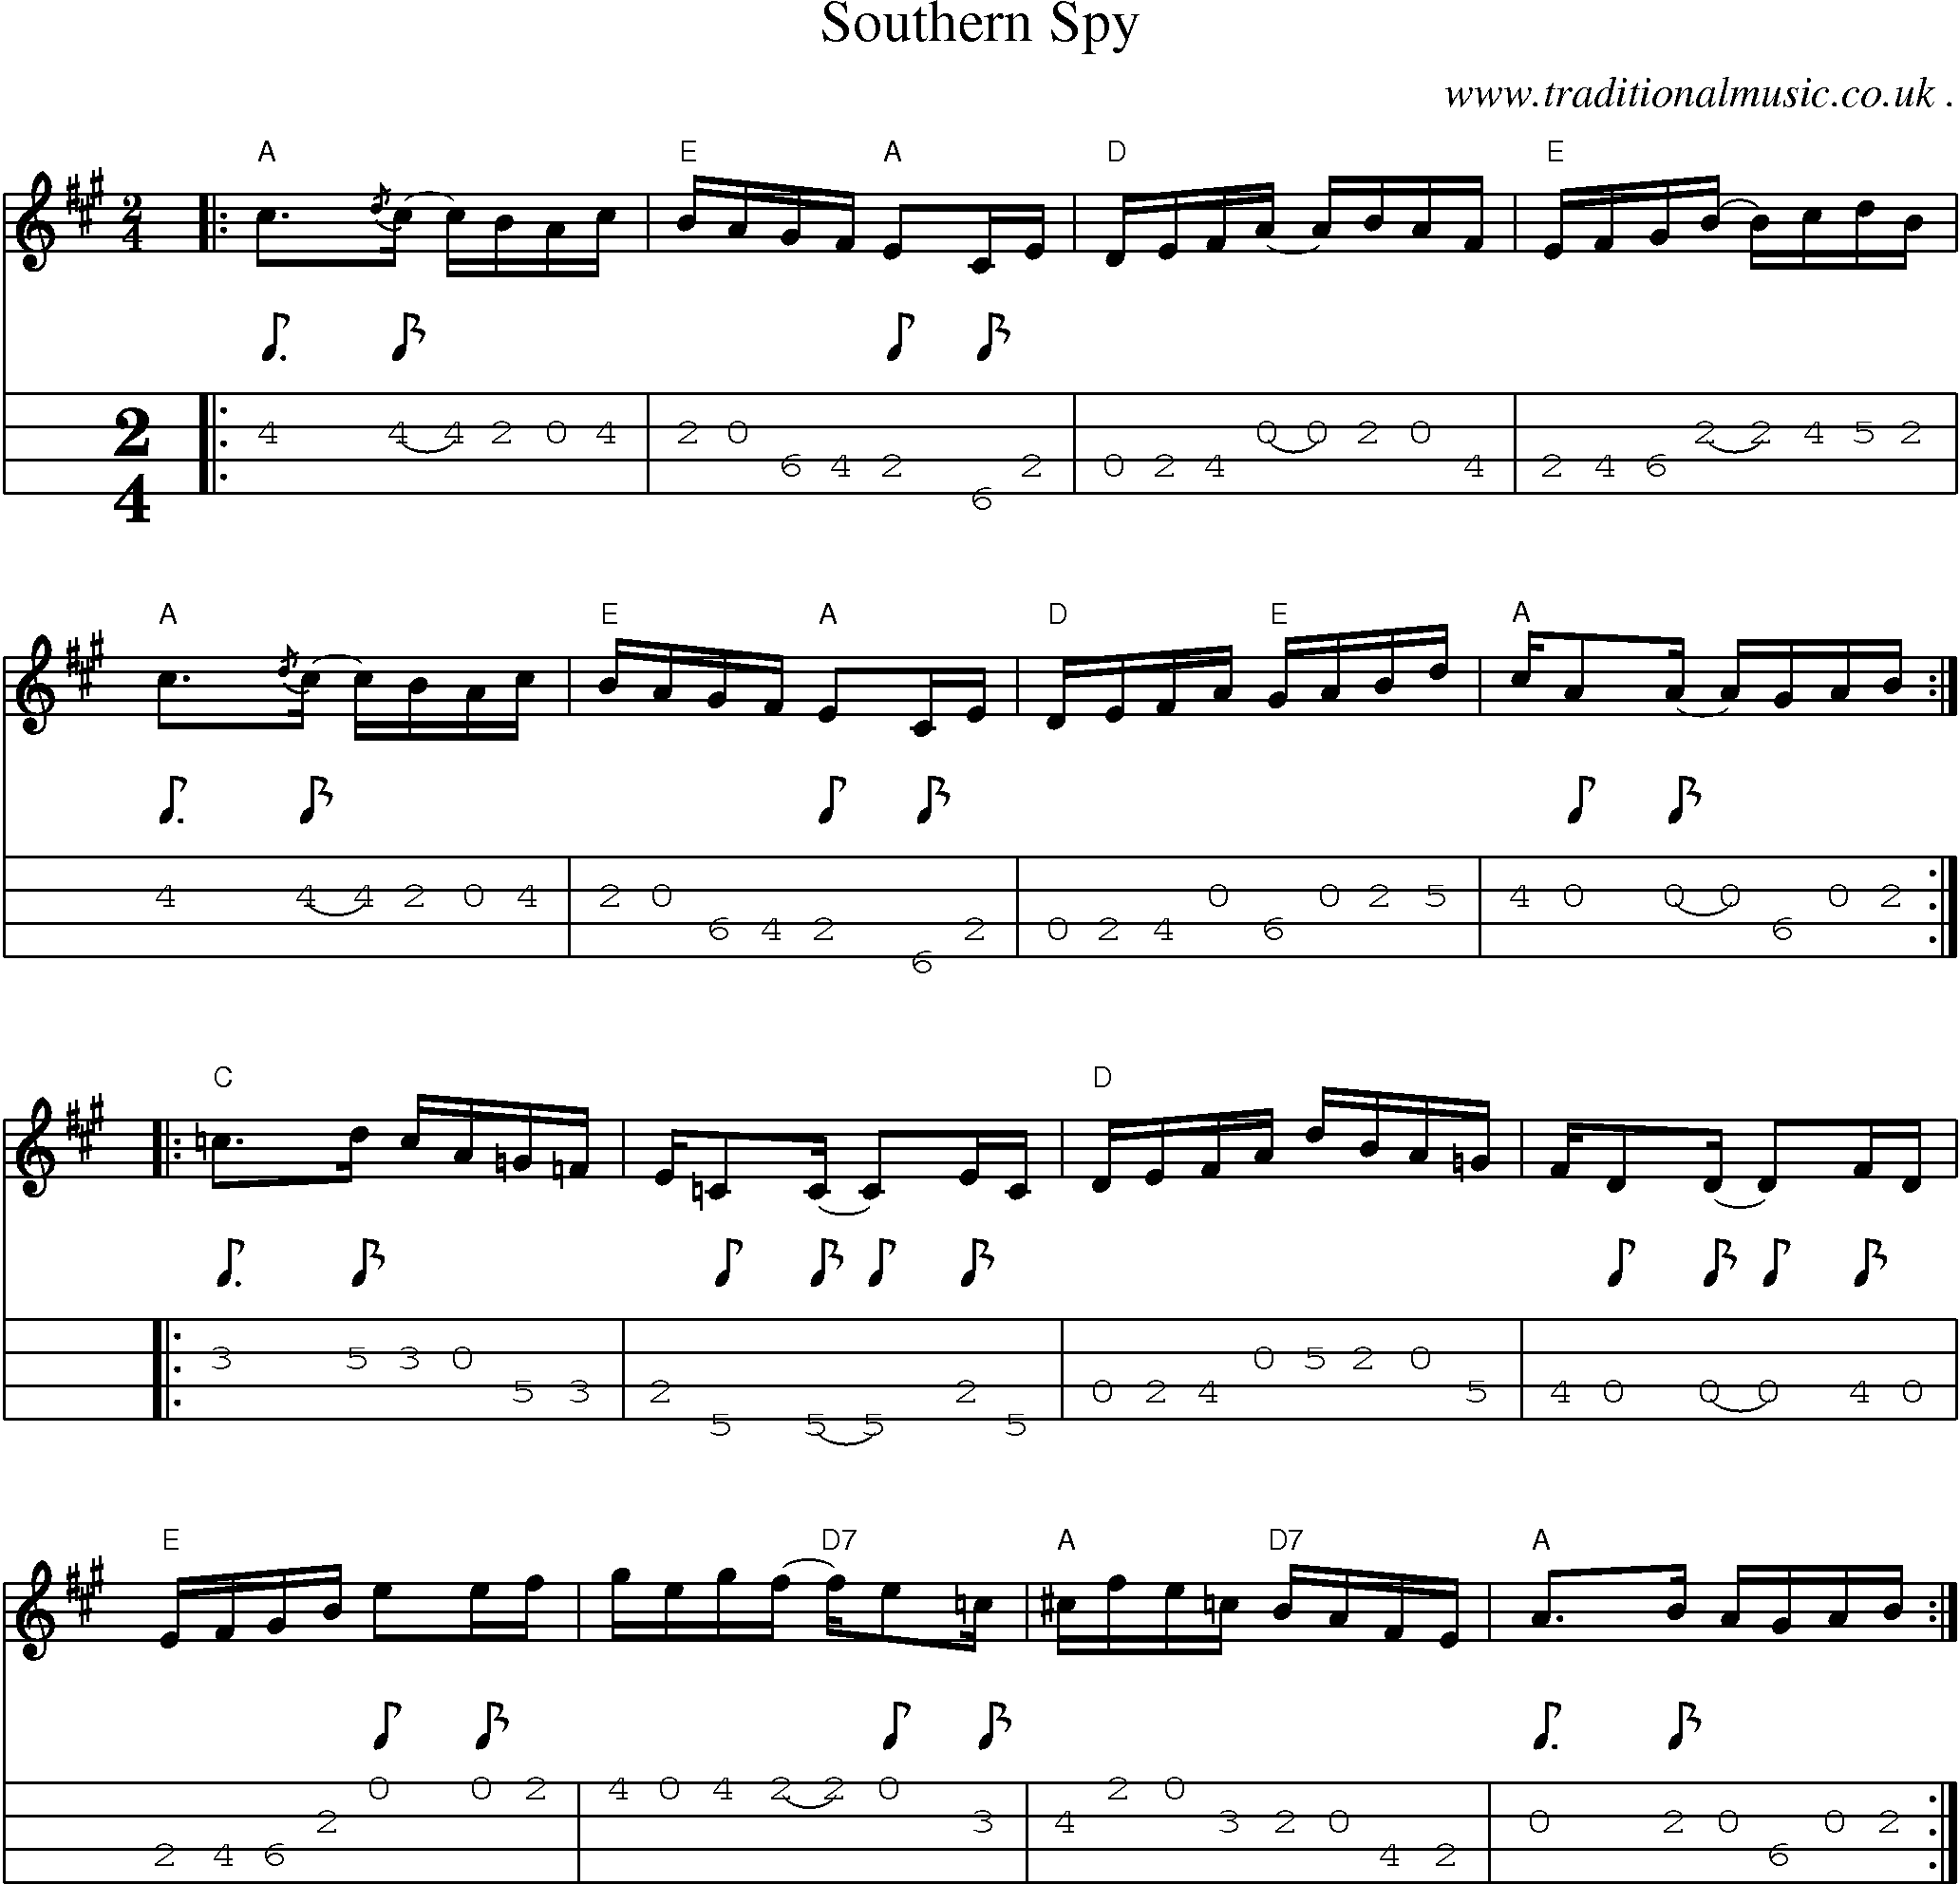 Music Score and Guitar Tabs for Southern Spy